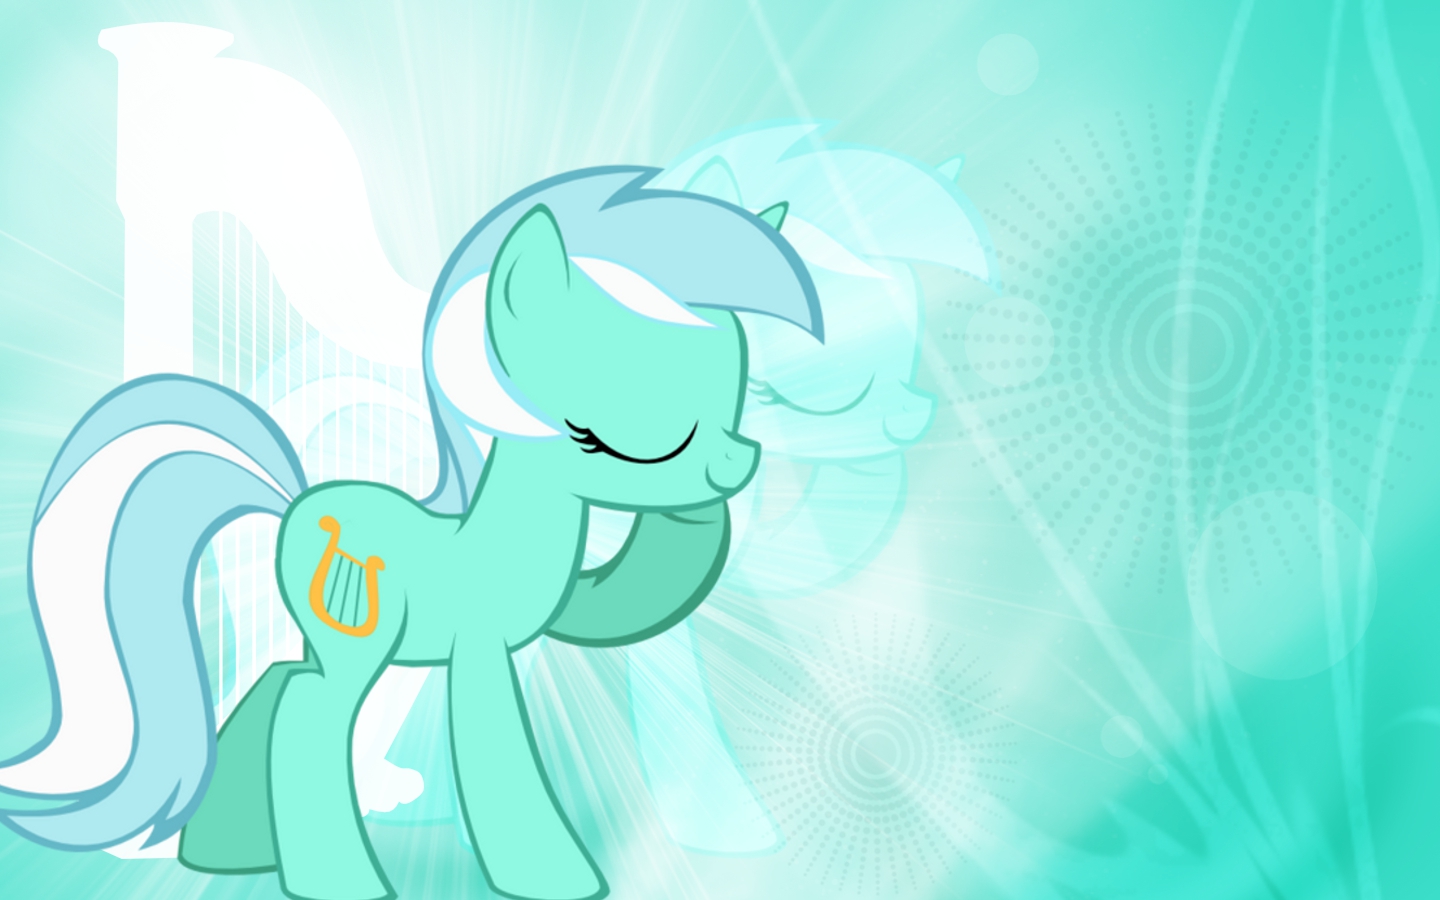 Lyra Wallpaper by DasinBoot and OceanBreezeBrony